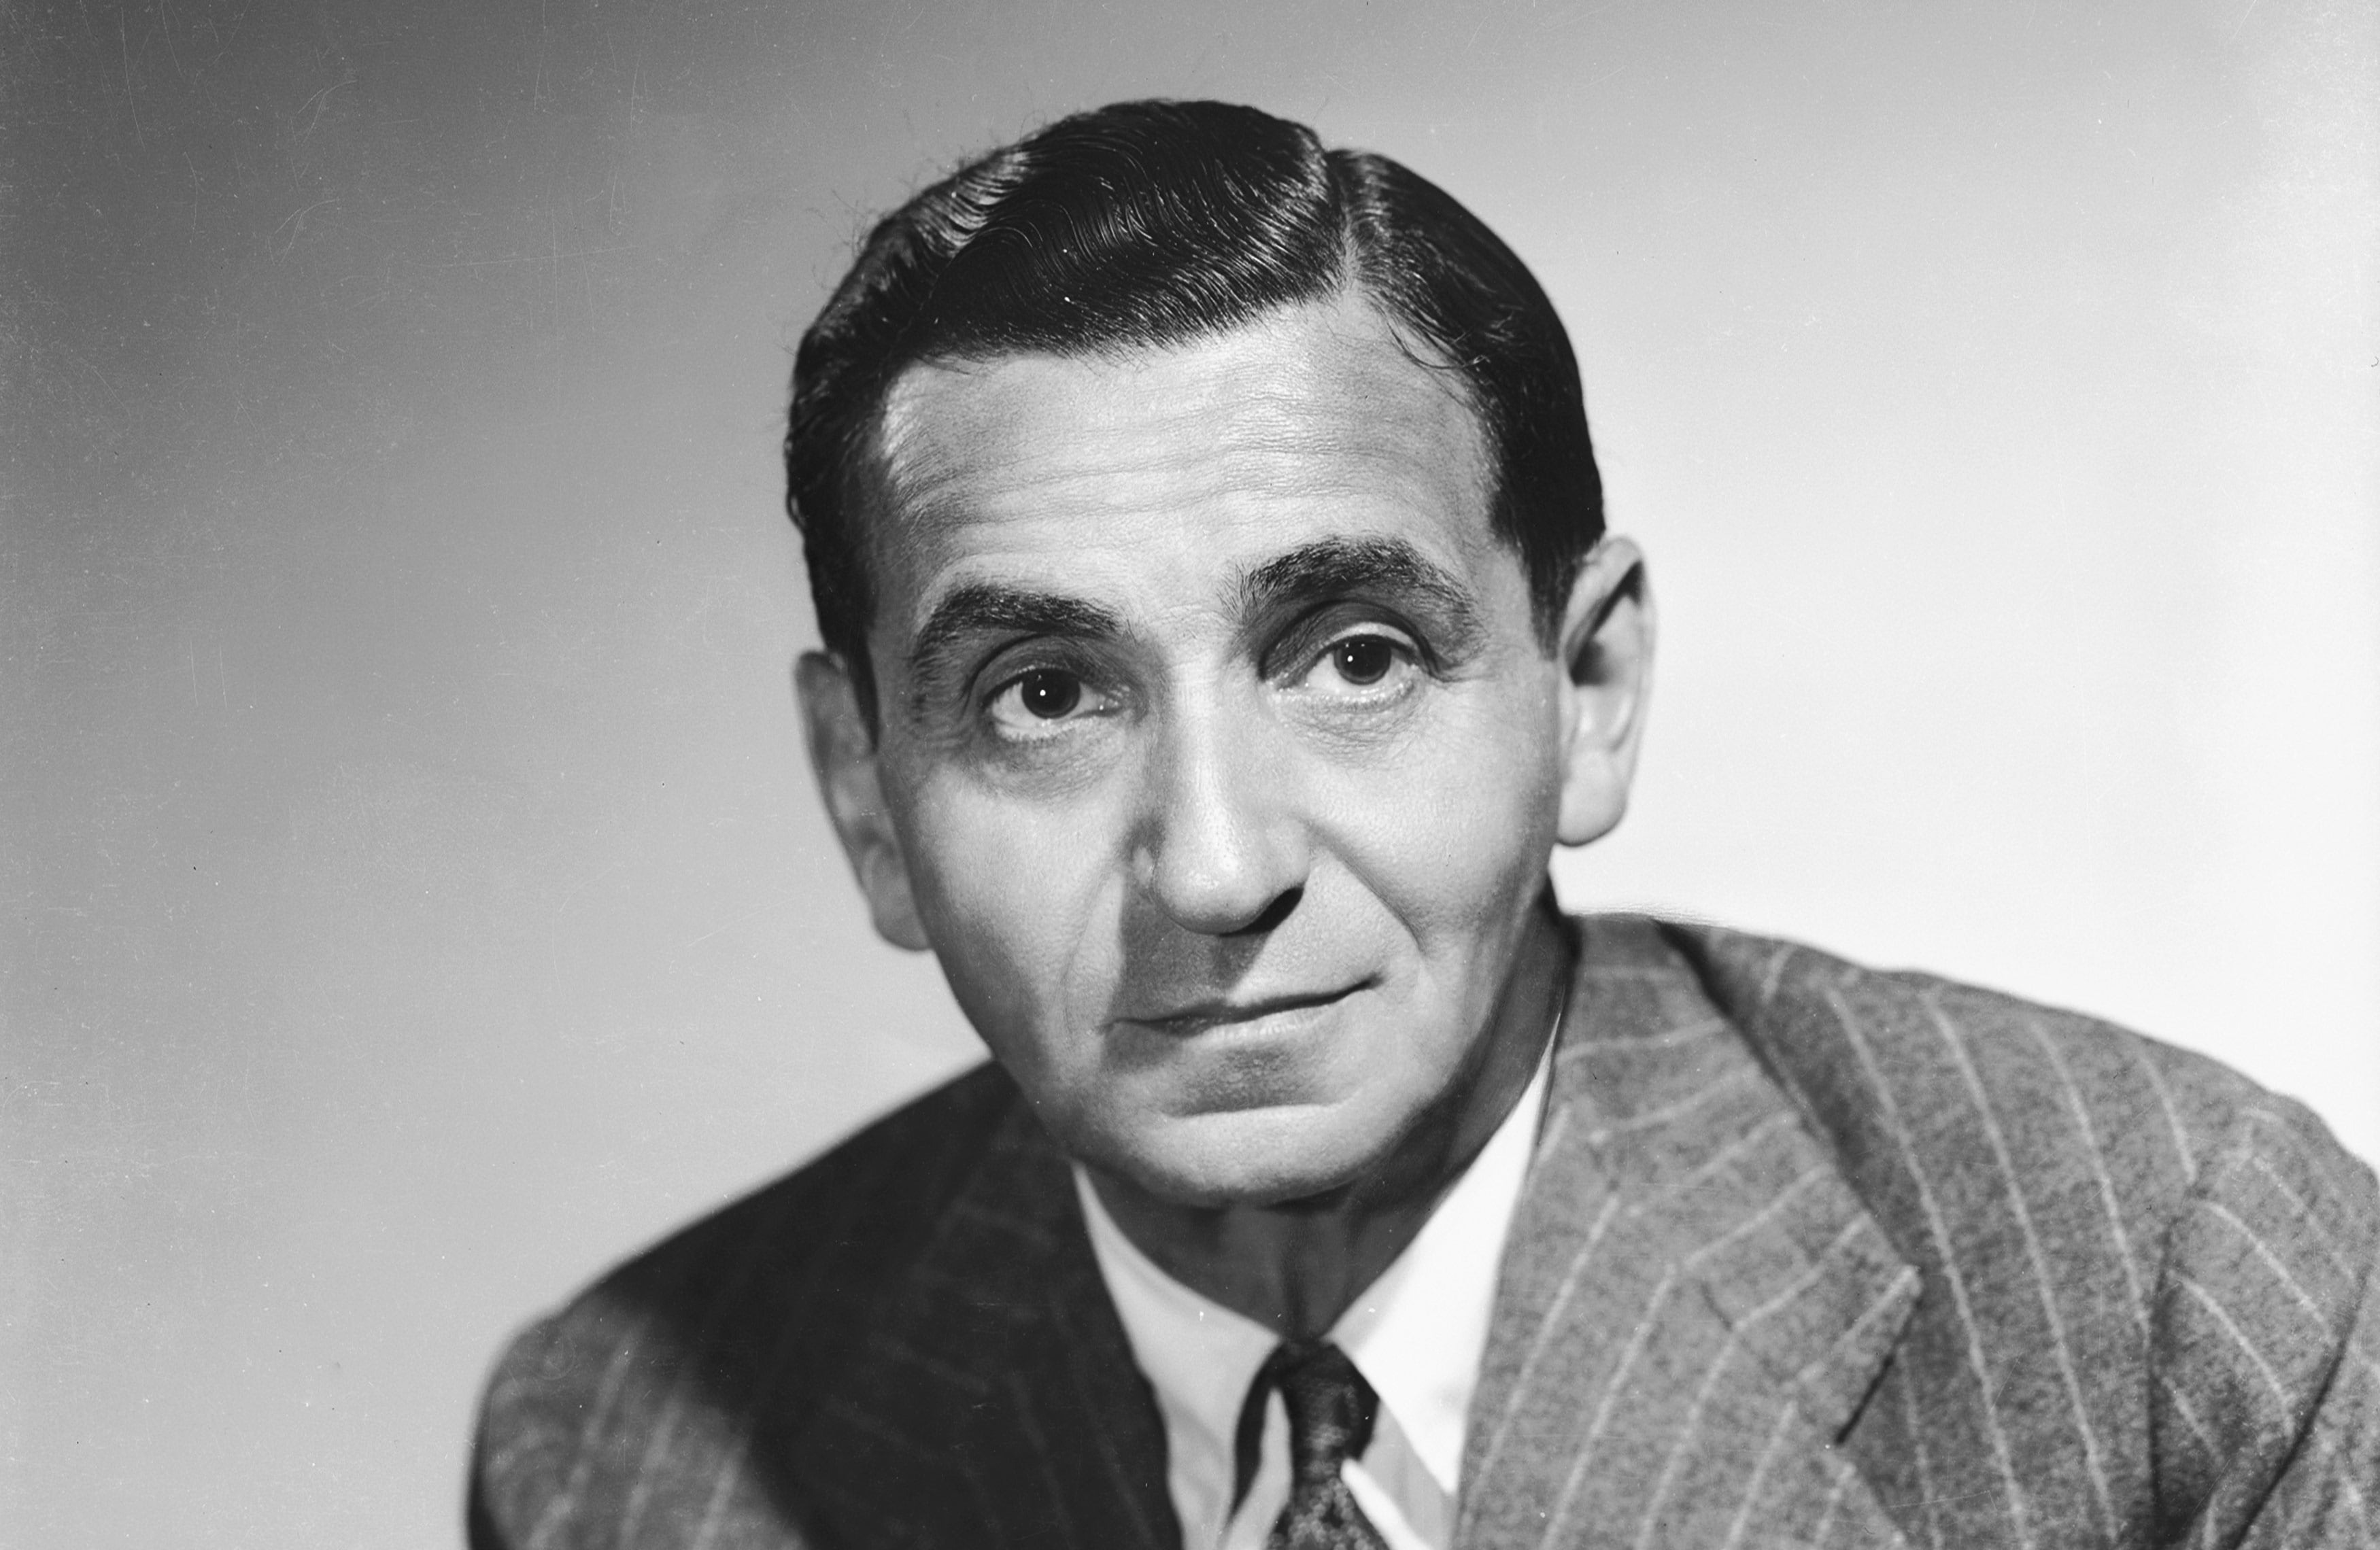 that Irving Berlin is the only Academy Award winner in history who presented the award to themselves. He won for writing ‘White Christmas’, and declared that opening the envelope was extremely awkward. The rules were then changed to prevent this ever happening again.